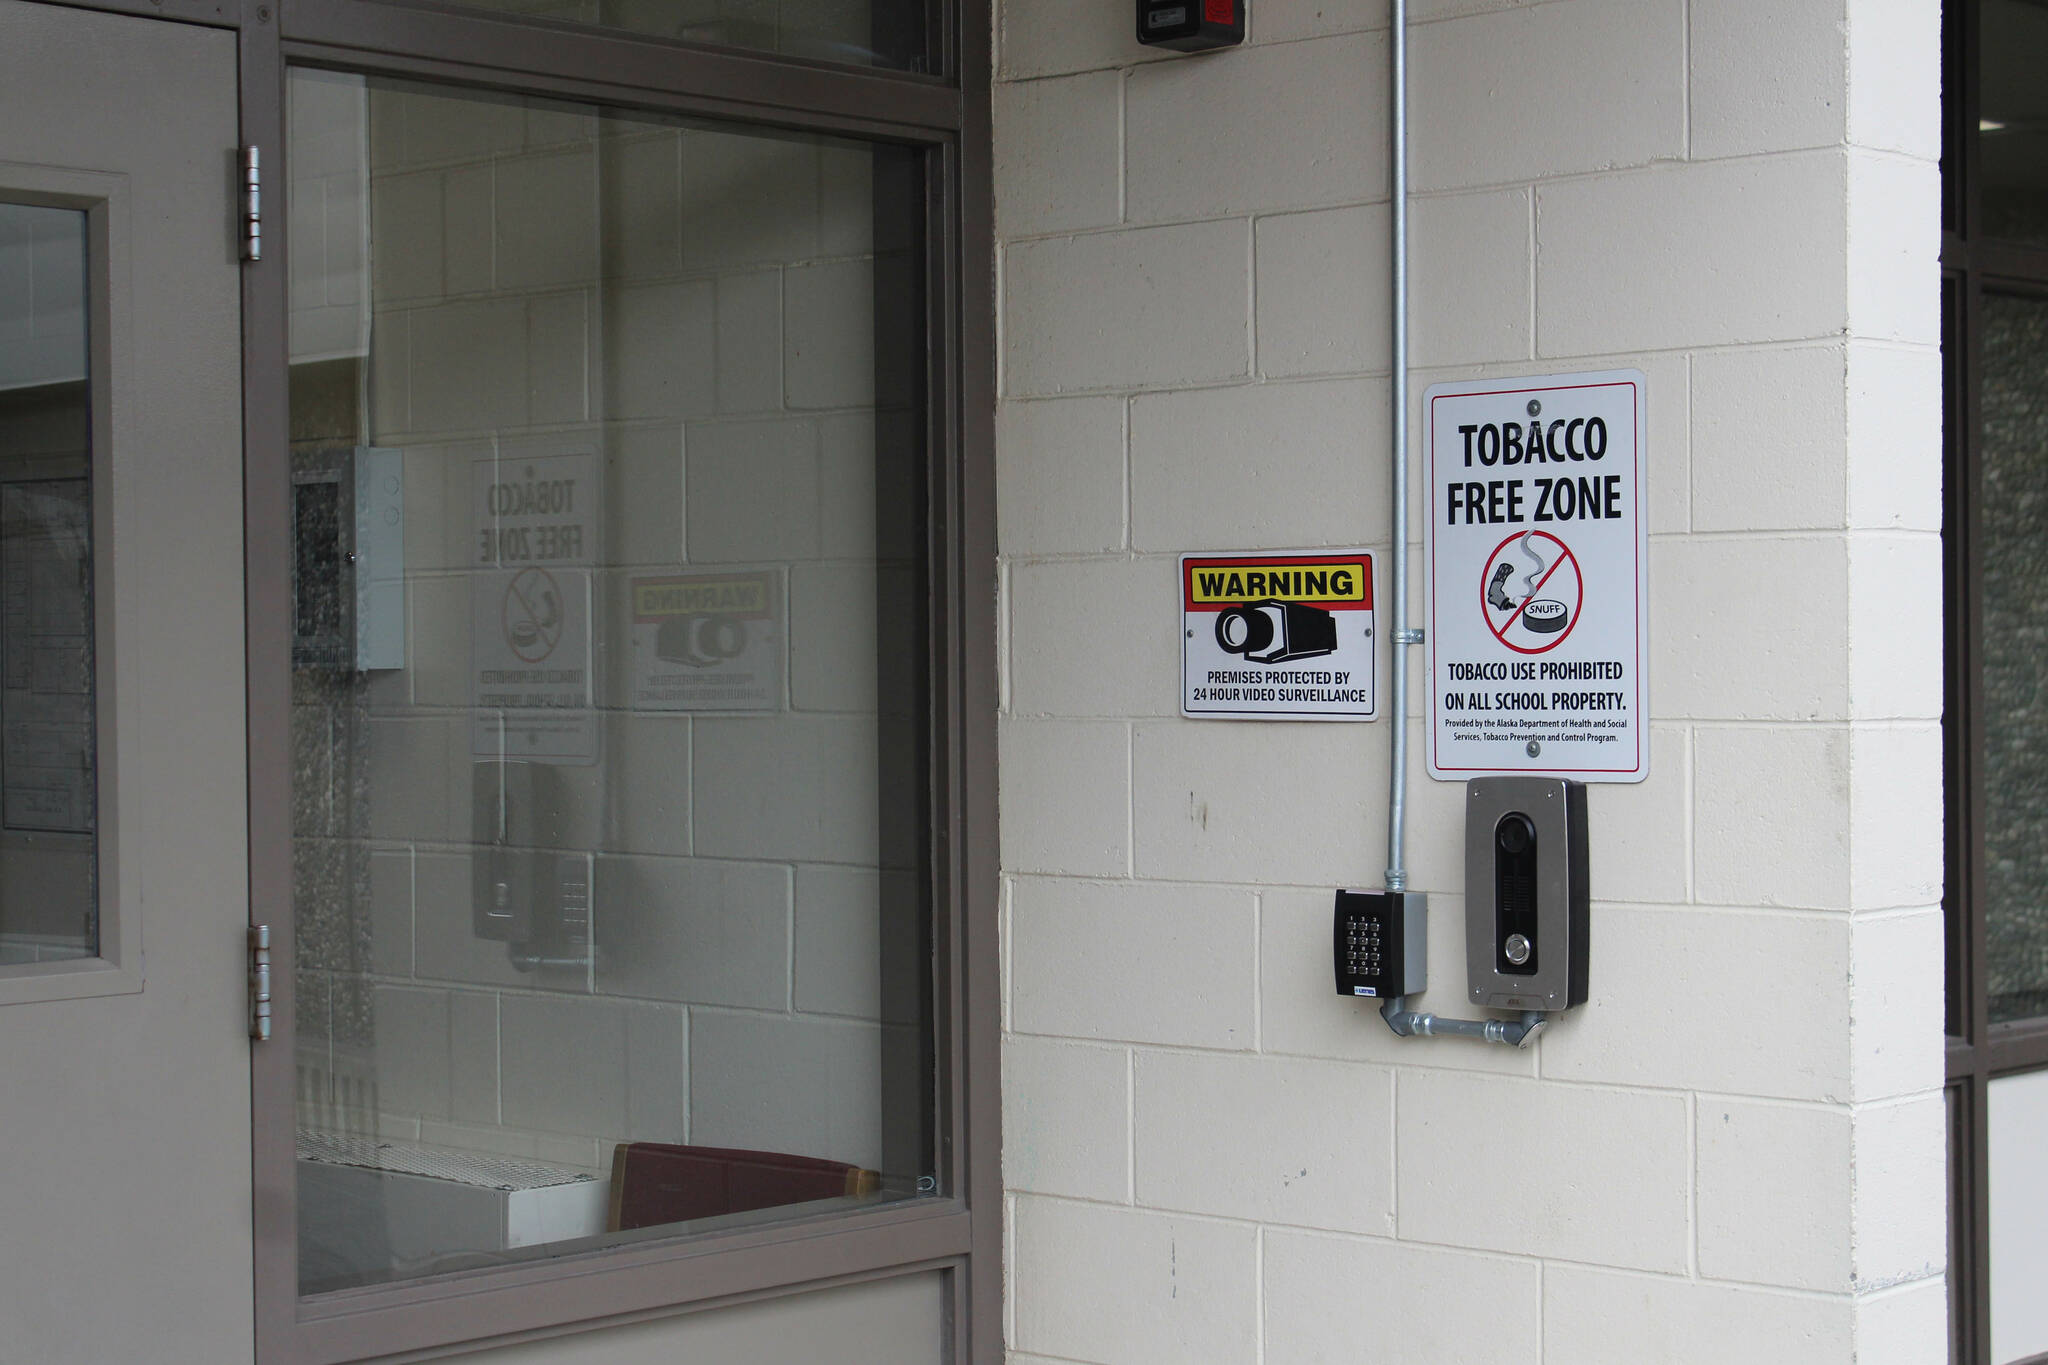 A camera and doorbell are mounted outside of the entrance to Kenai Middle School on Wednesday, Sept. 21, 2022, in Kenai, Alaska. (Ashlyn O’Hara/Peninsula Clarion)